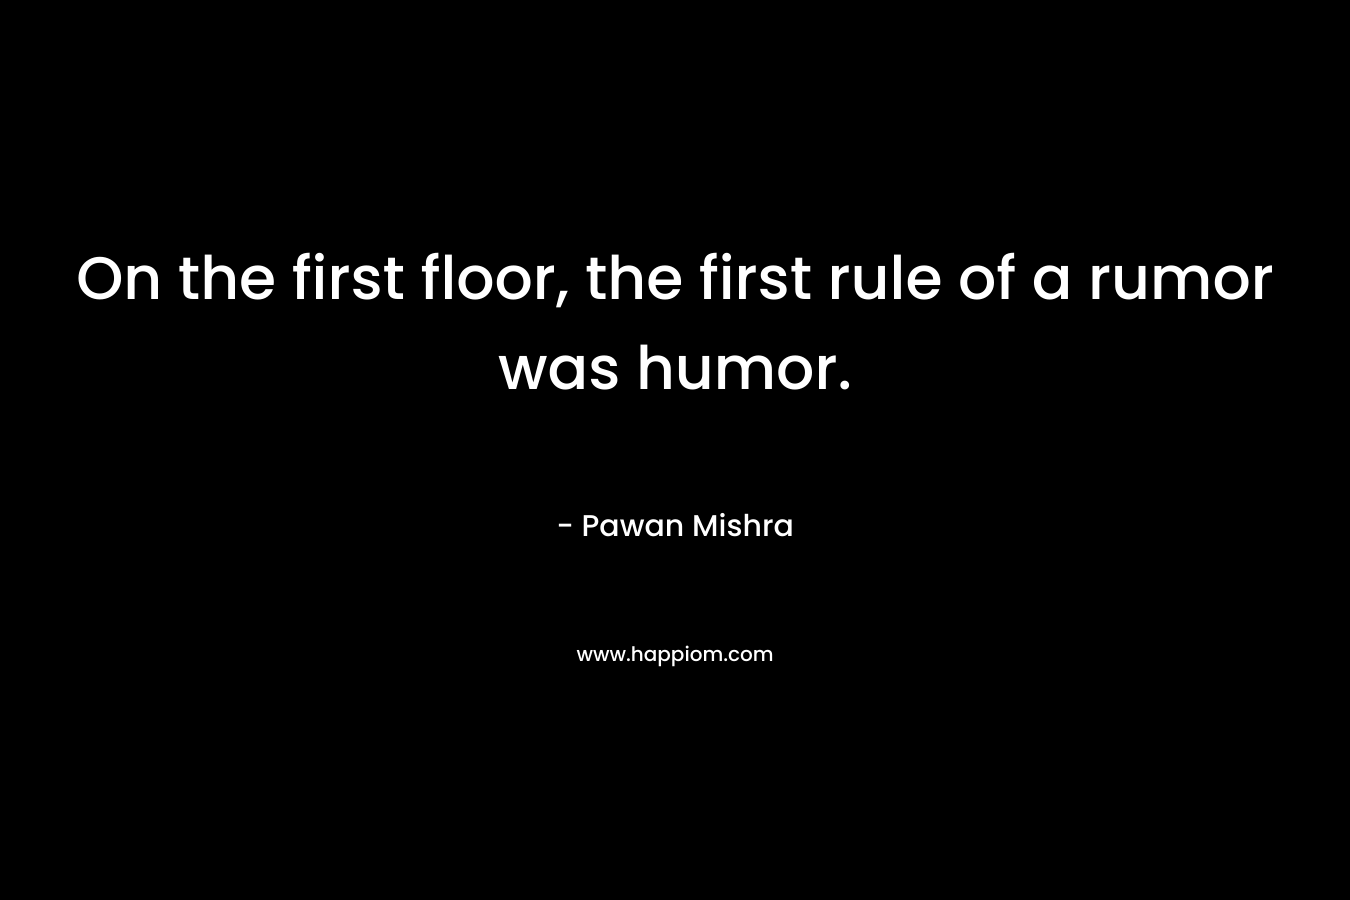 On the first floor, the first rule of a rumor was humor. – Pawan Mishra